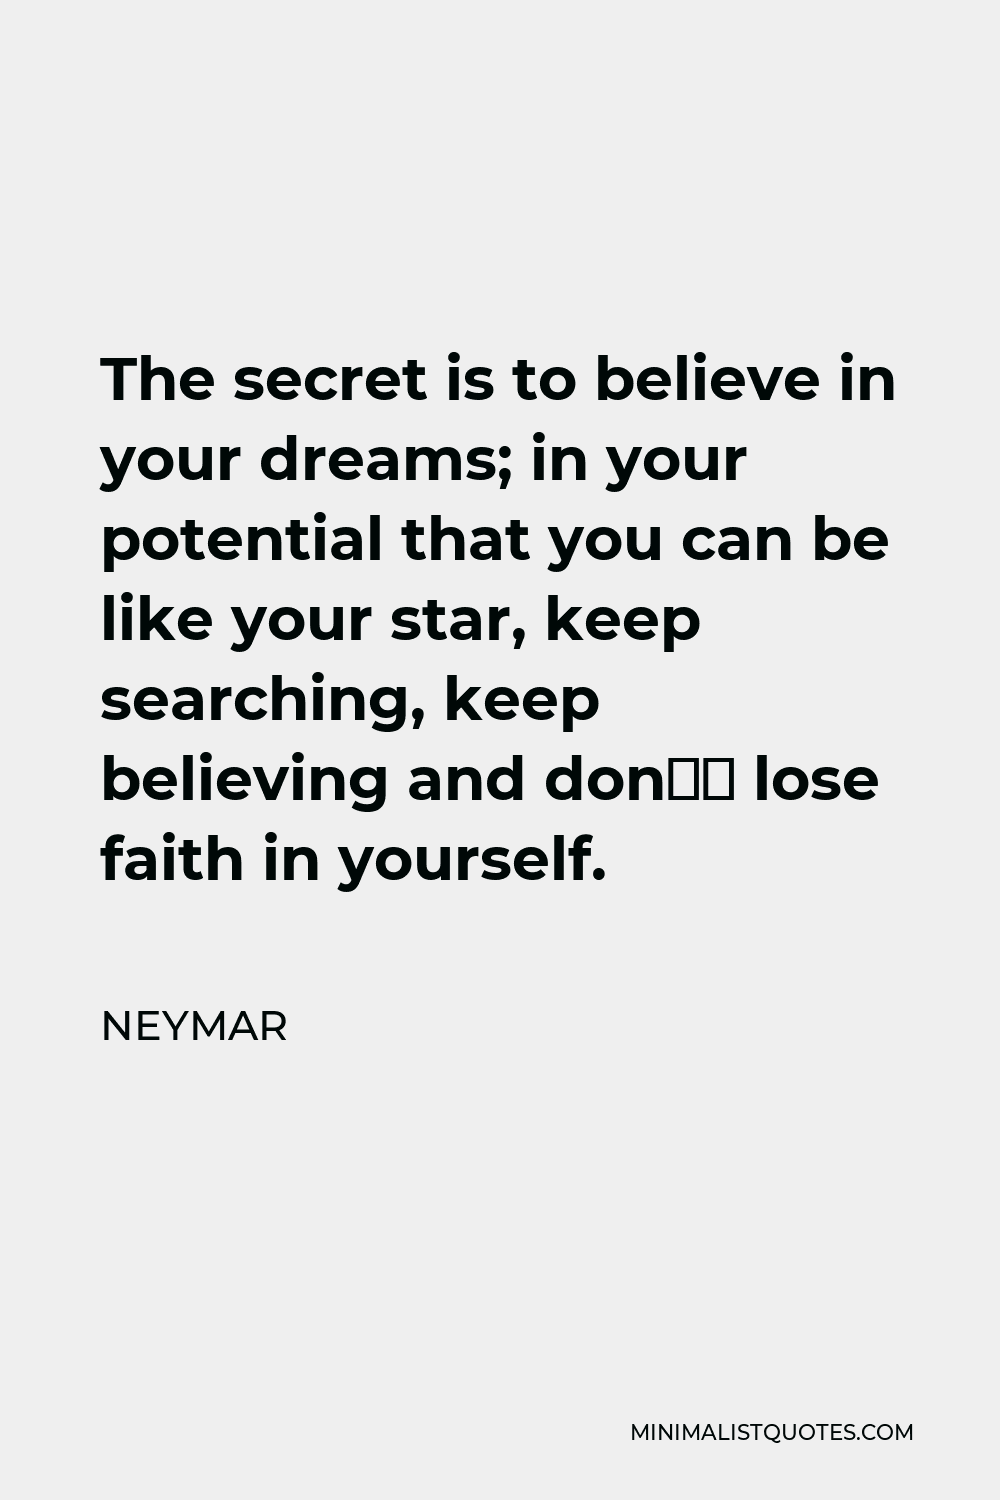 Neymar Quote - The secret is to believe in your dreams; in your potential that you can be like your star, keep searching, keep believing and don’t lose faith in yourself.